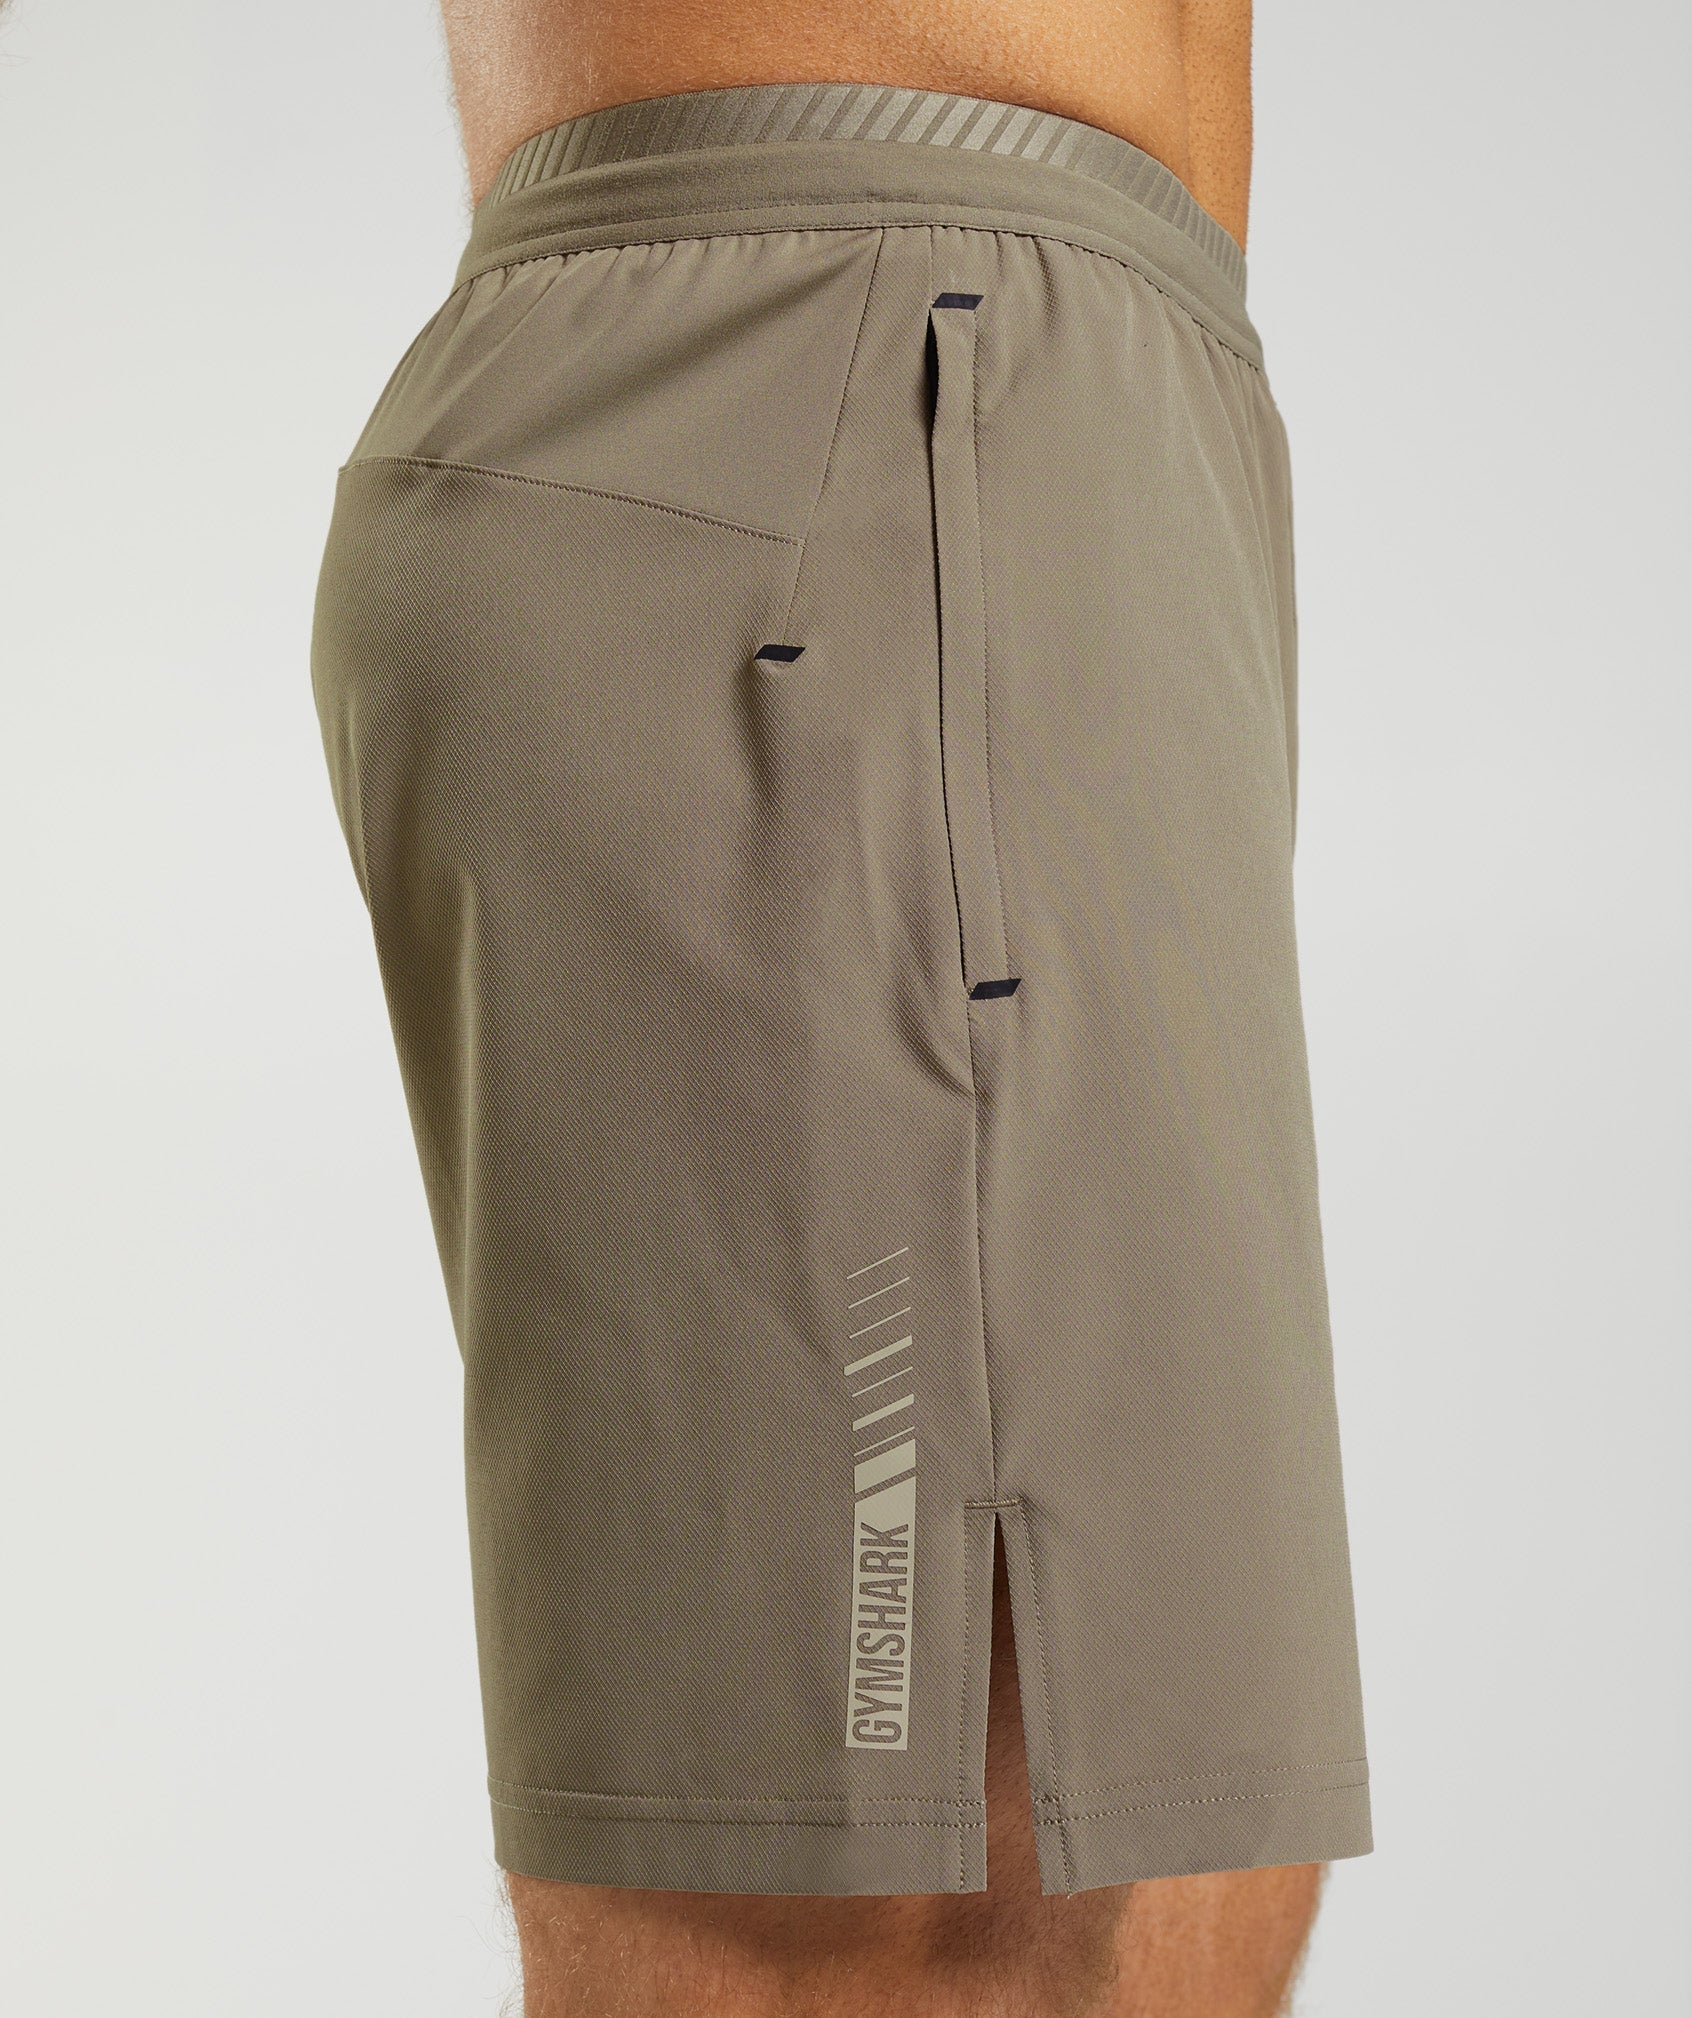 Apex 7" Hybrid Shorts in Earthy Brown - view 6